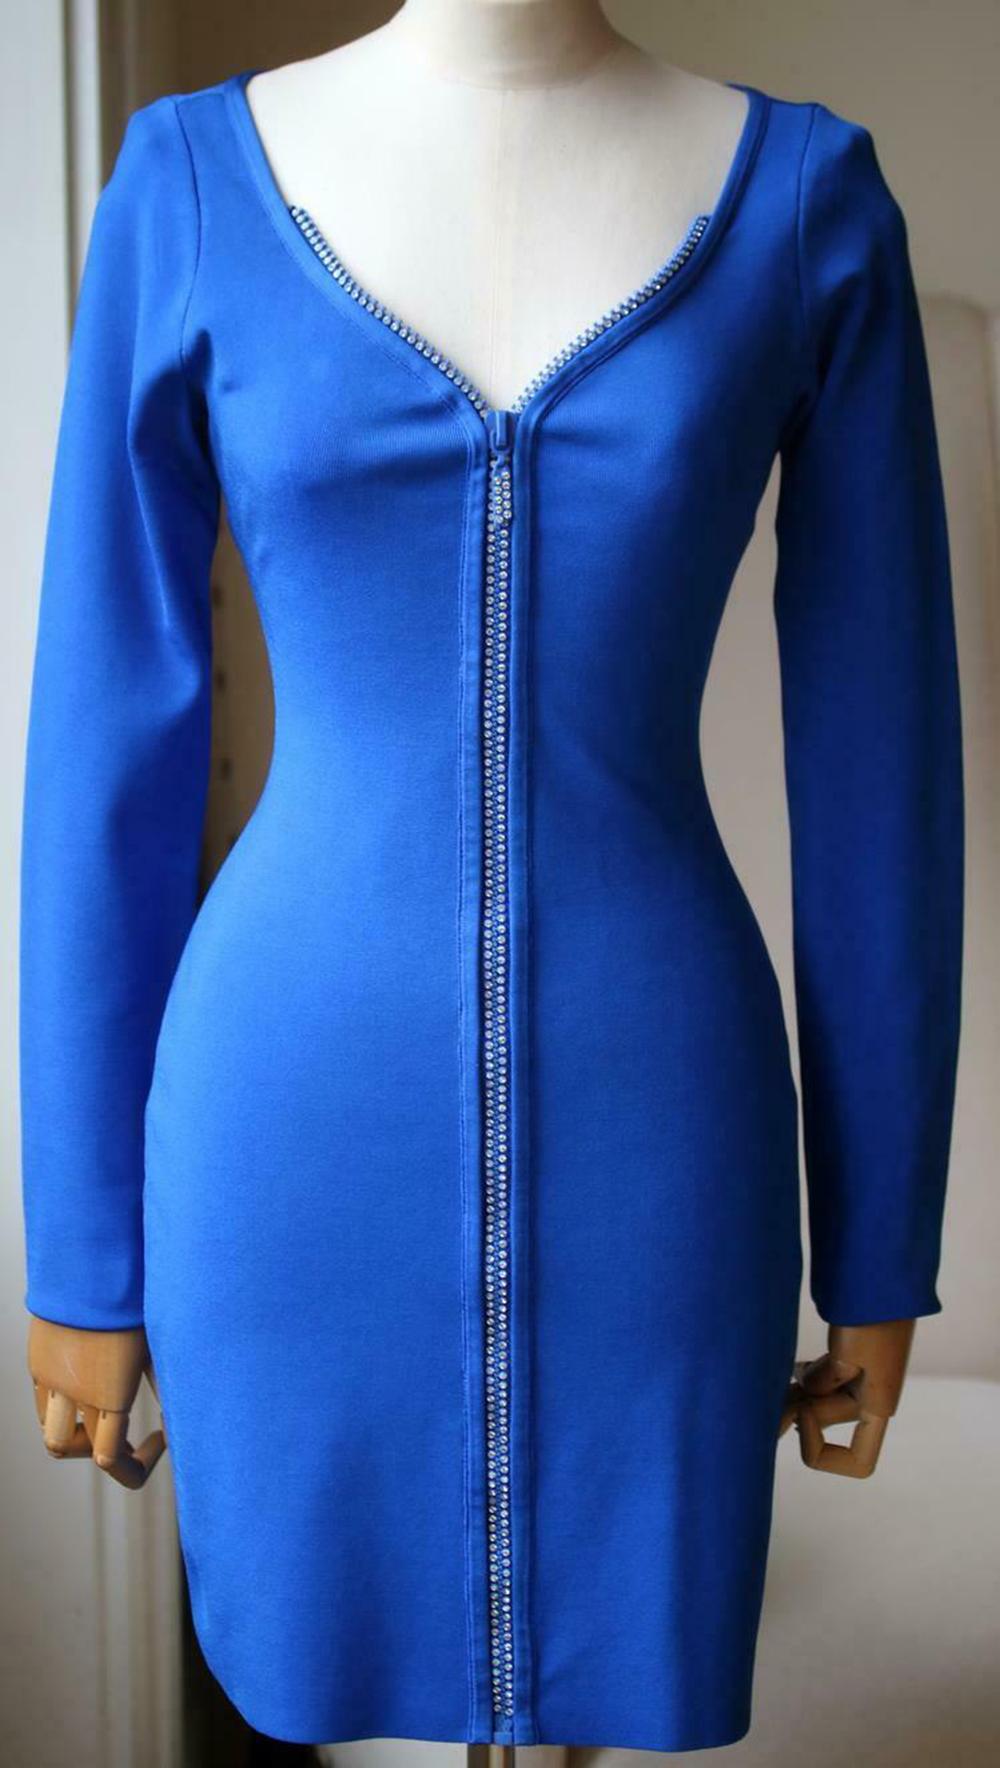 This David Koma mini crystal zip knit dress features a sweetheart neckline and a crystal zipper down the front. Long sleeve, mini length, unlined. Front zip closure. 75% Rayon, 23% nylon, 2% spandex.

Size: Large (UK 12, US 8, FR 40, IT